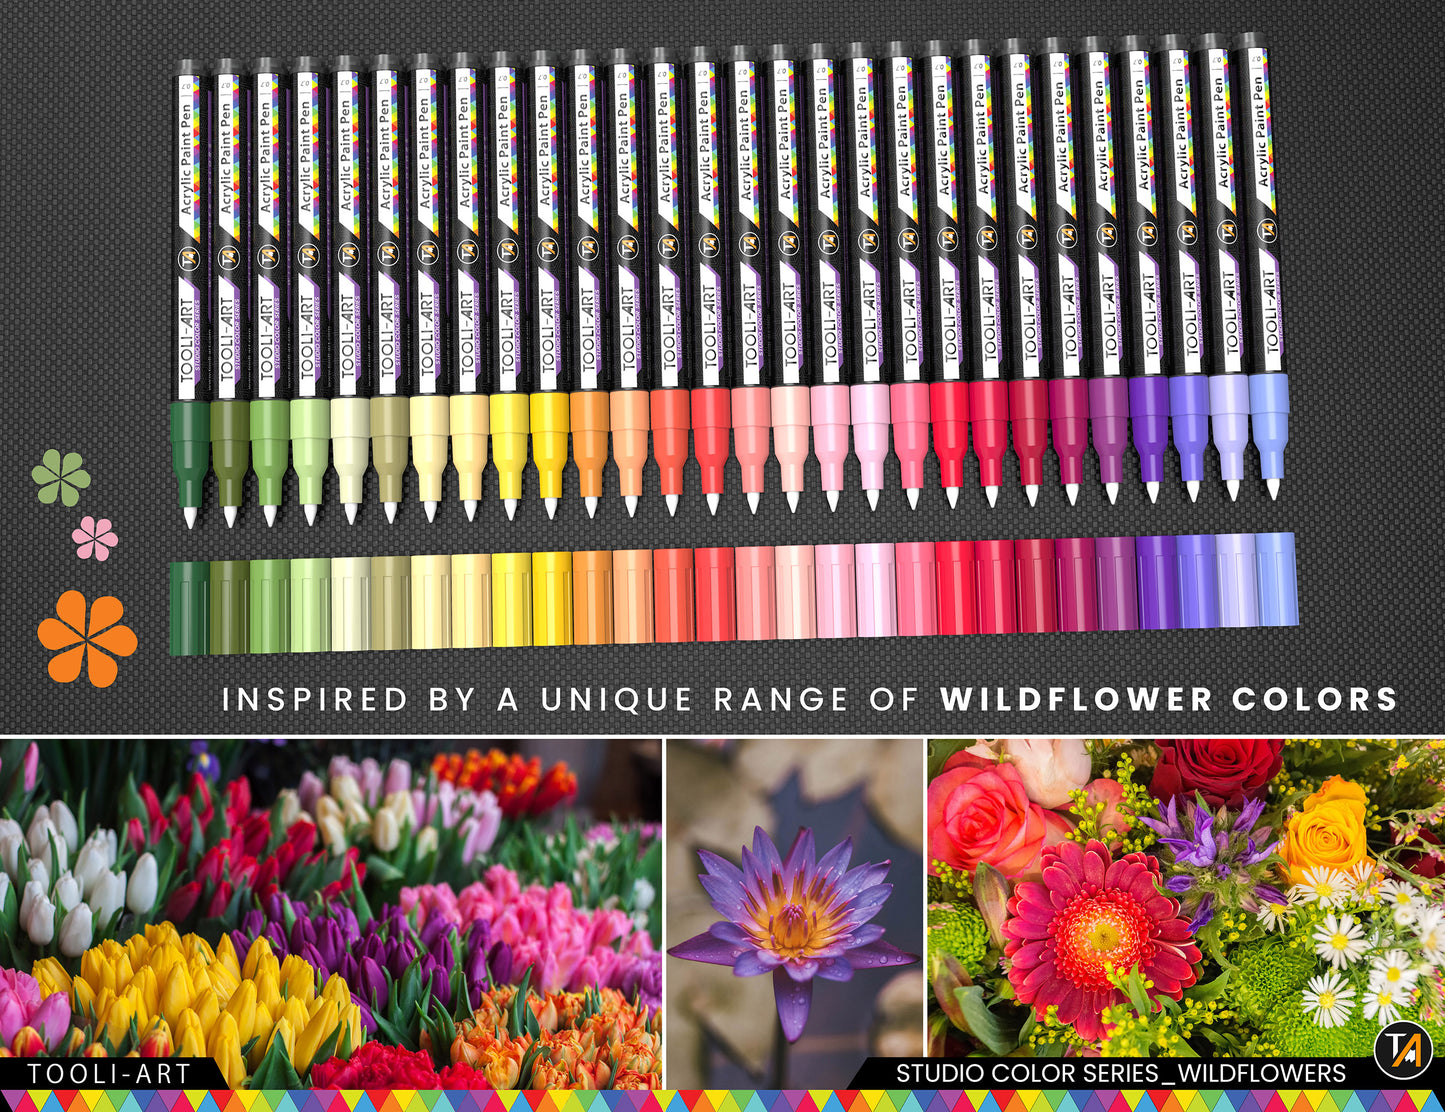 28 Wildflower Colors Acrylic Paint Pens Studio Color Series Markers Set 0.7mm Extra Fine